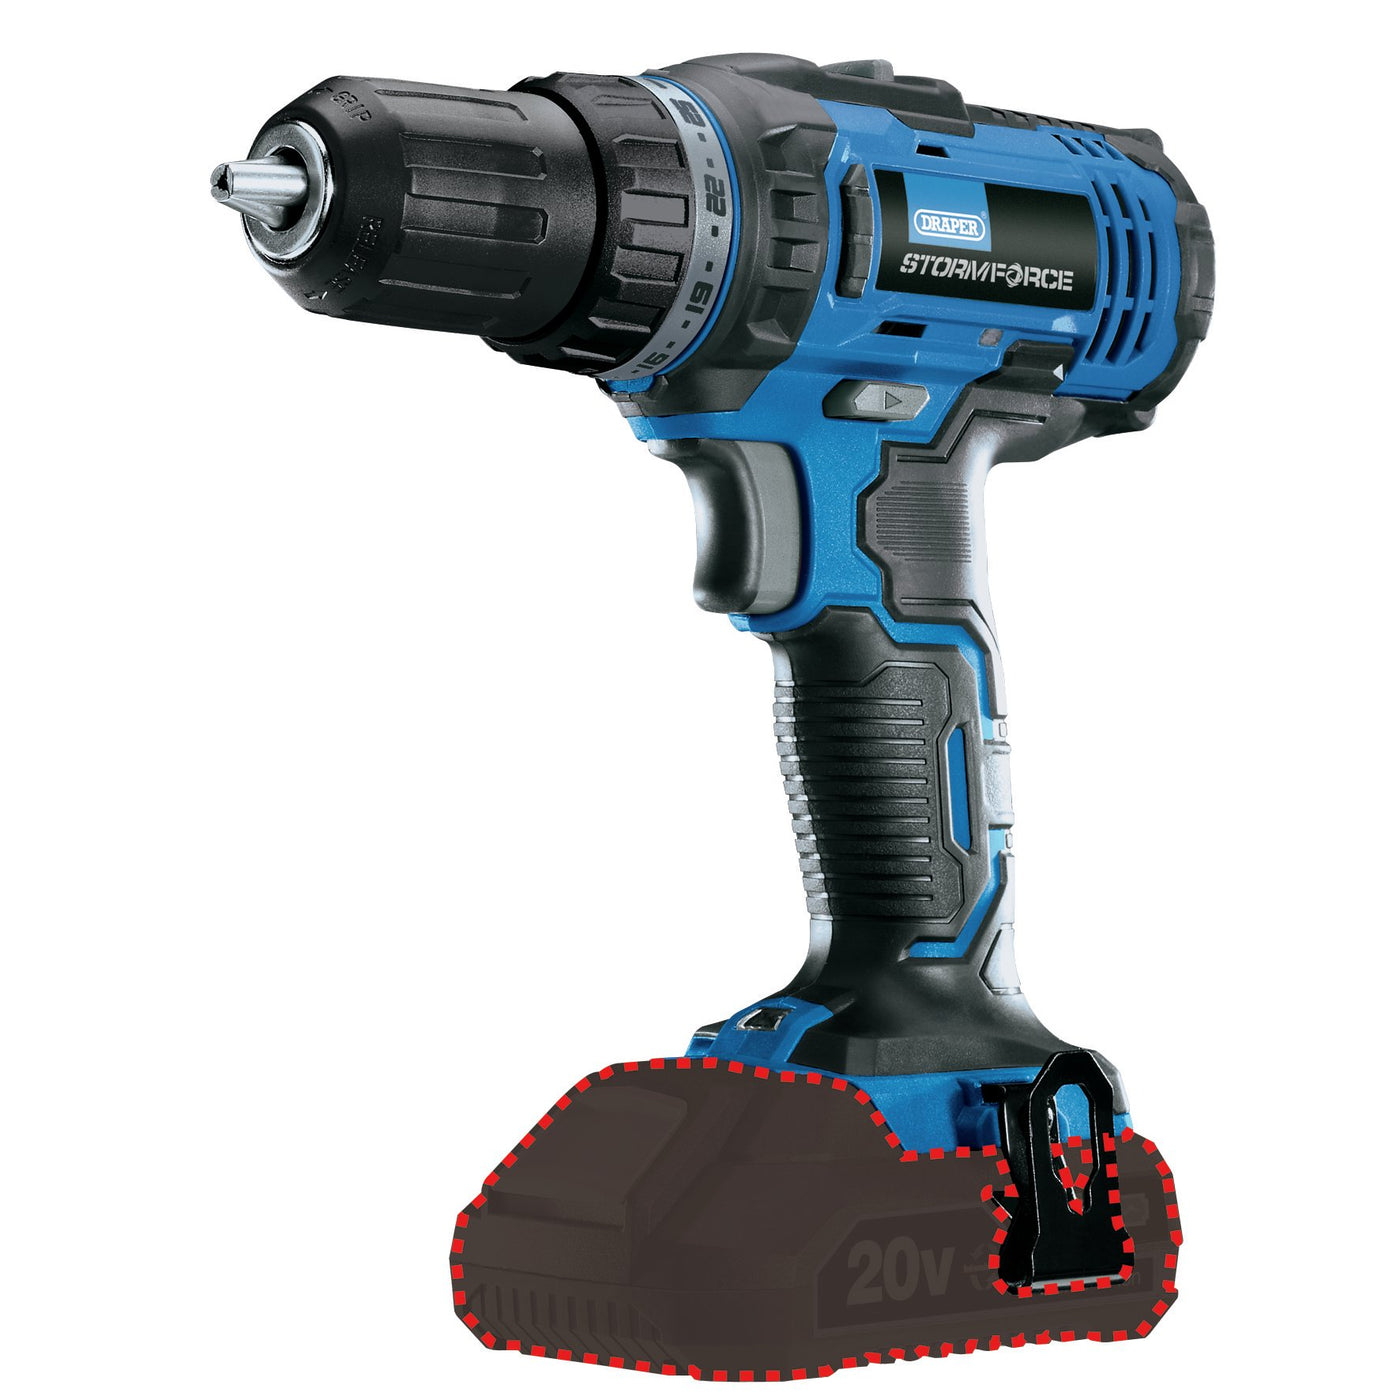 Draper 89524 Storm Force 20V Drill Driver, Body Only